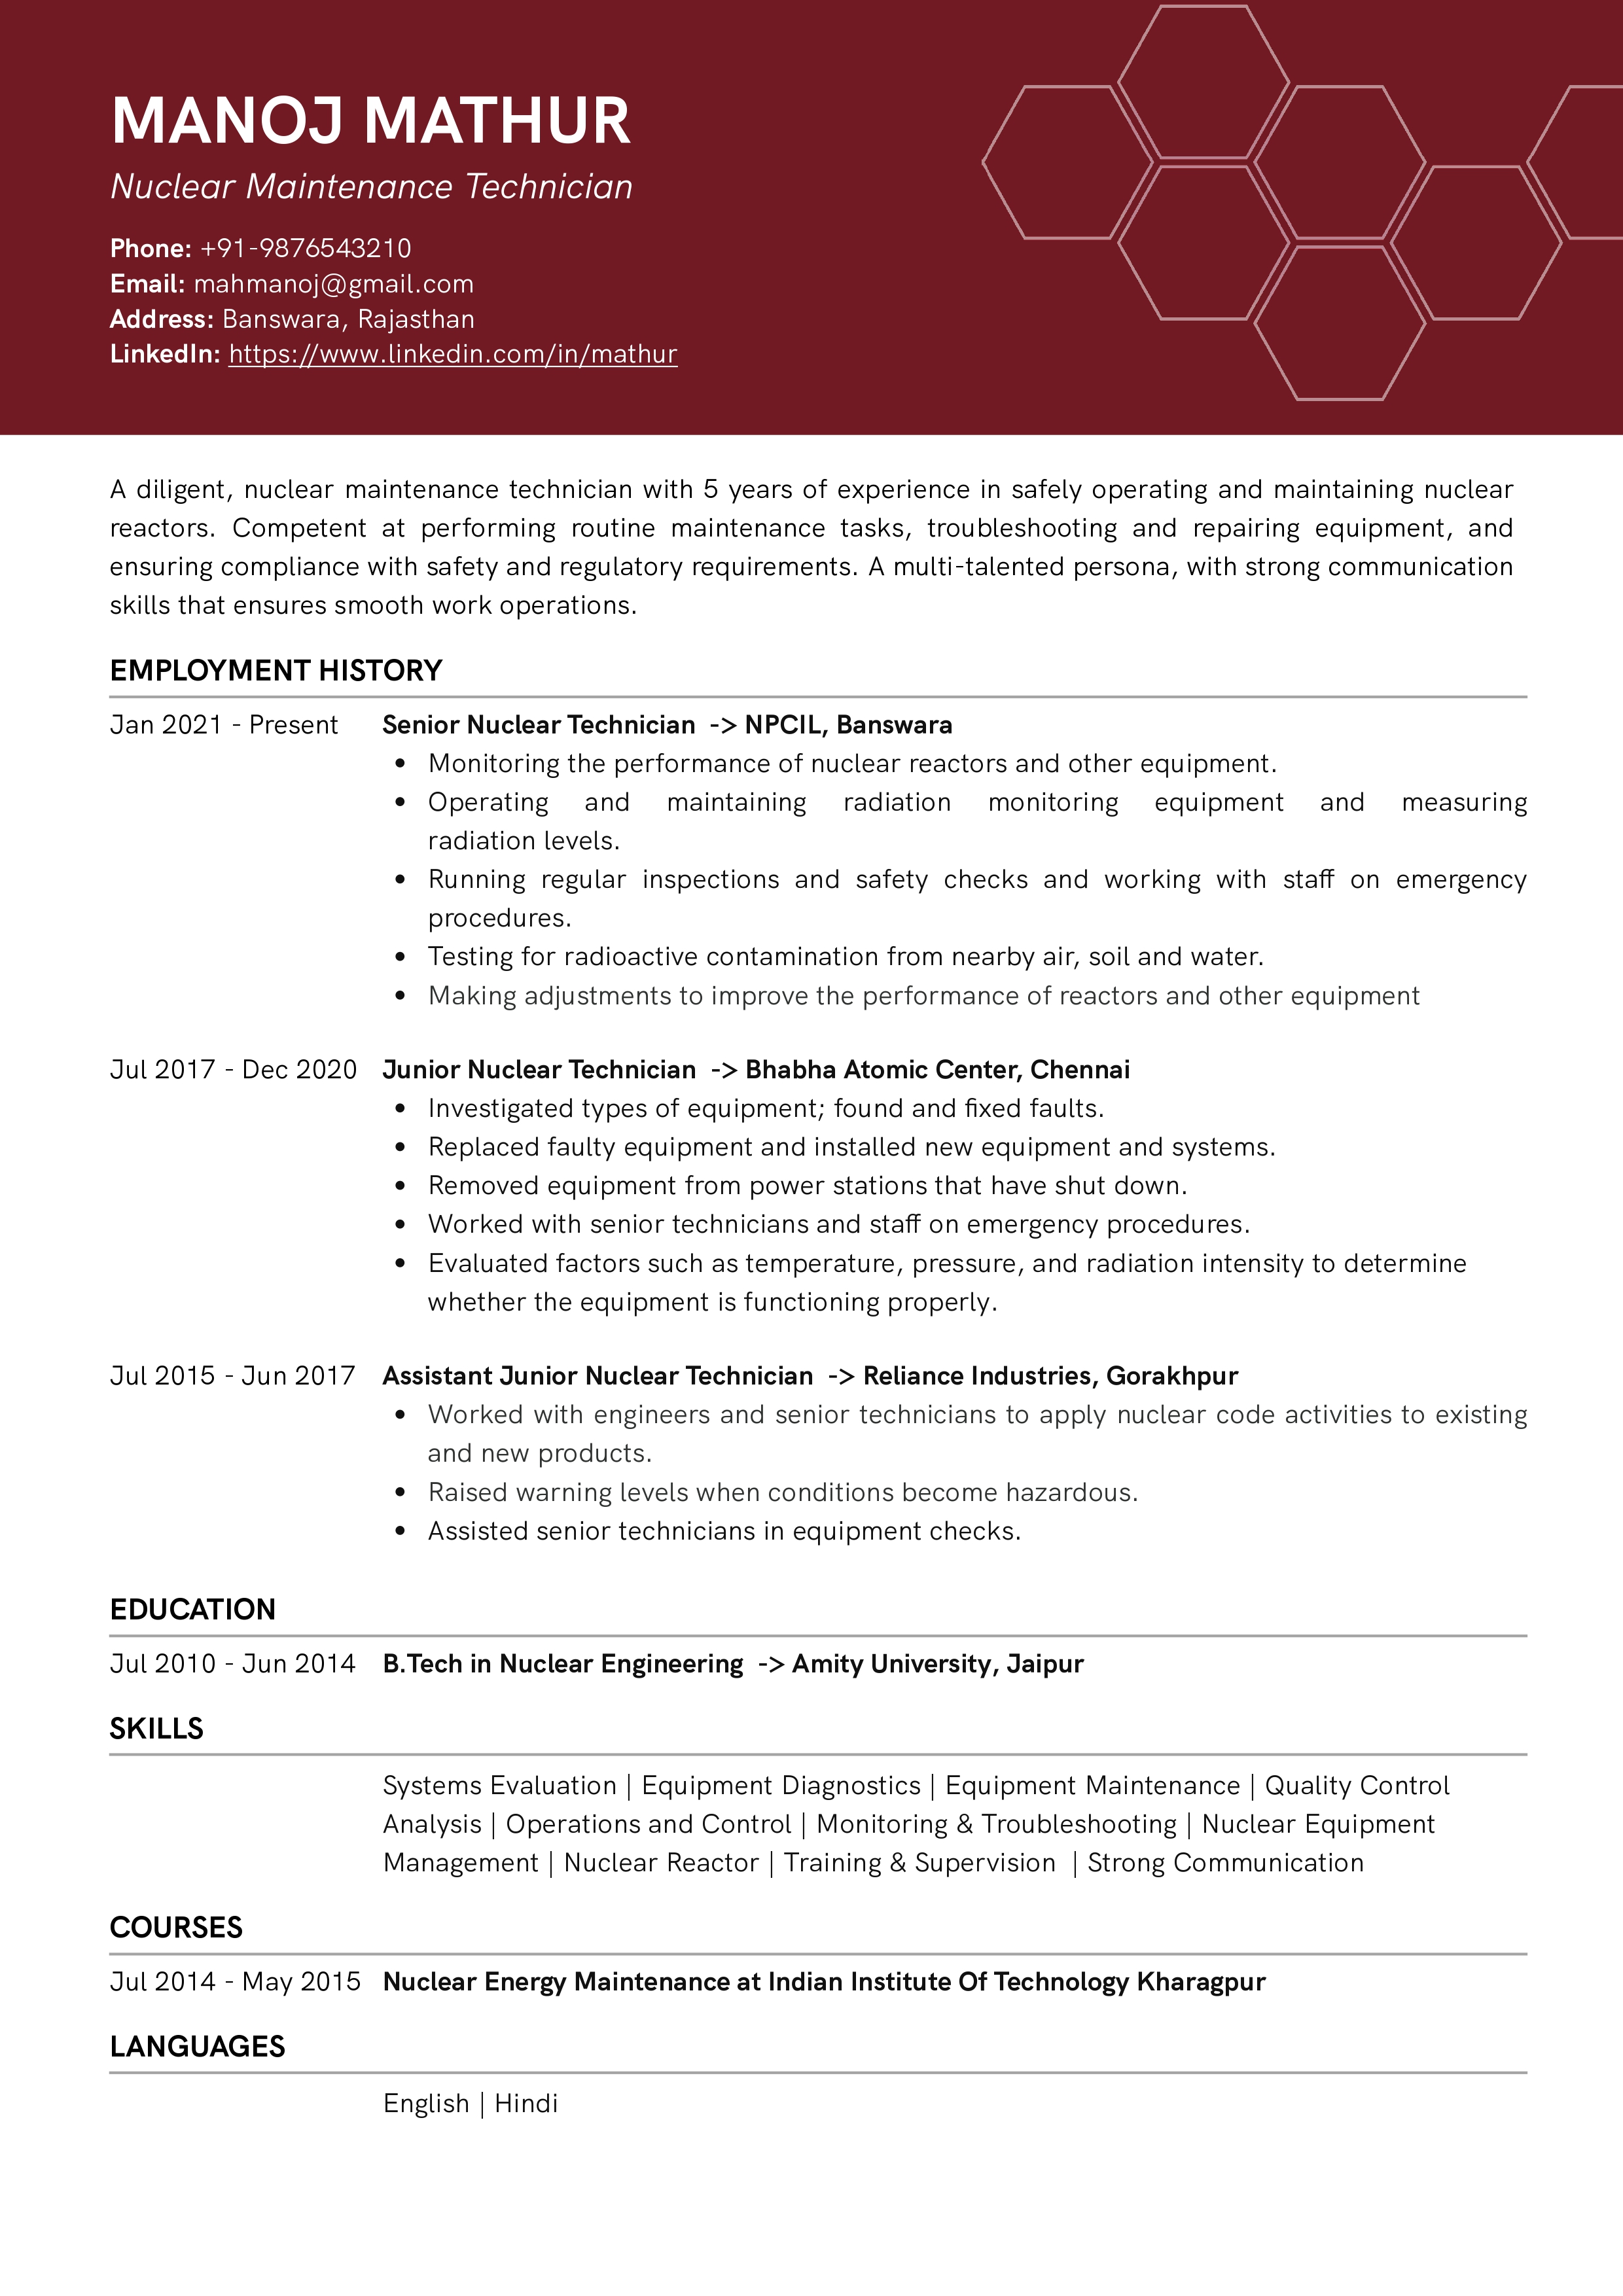 Sample Resume of Nuclear Maintenance Technician | Free Resume Templates & Samples on Resumod.co